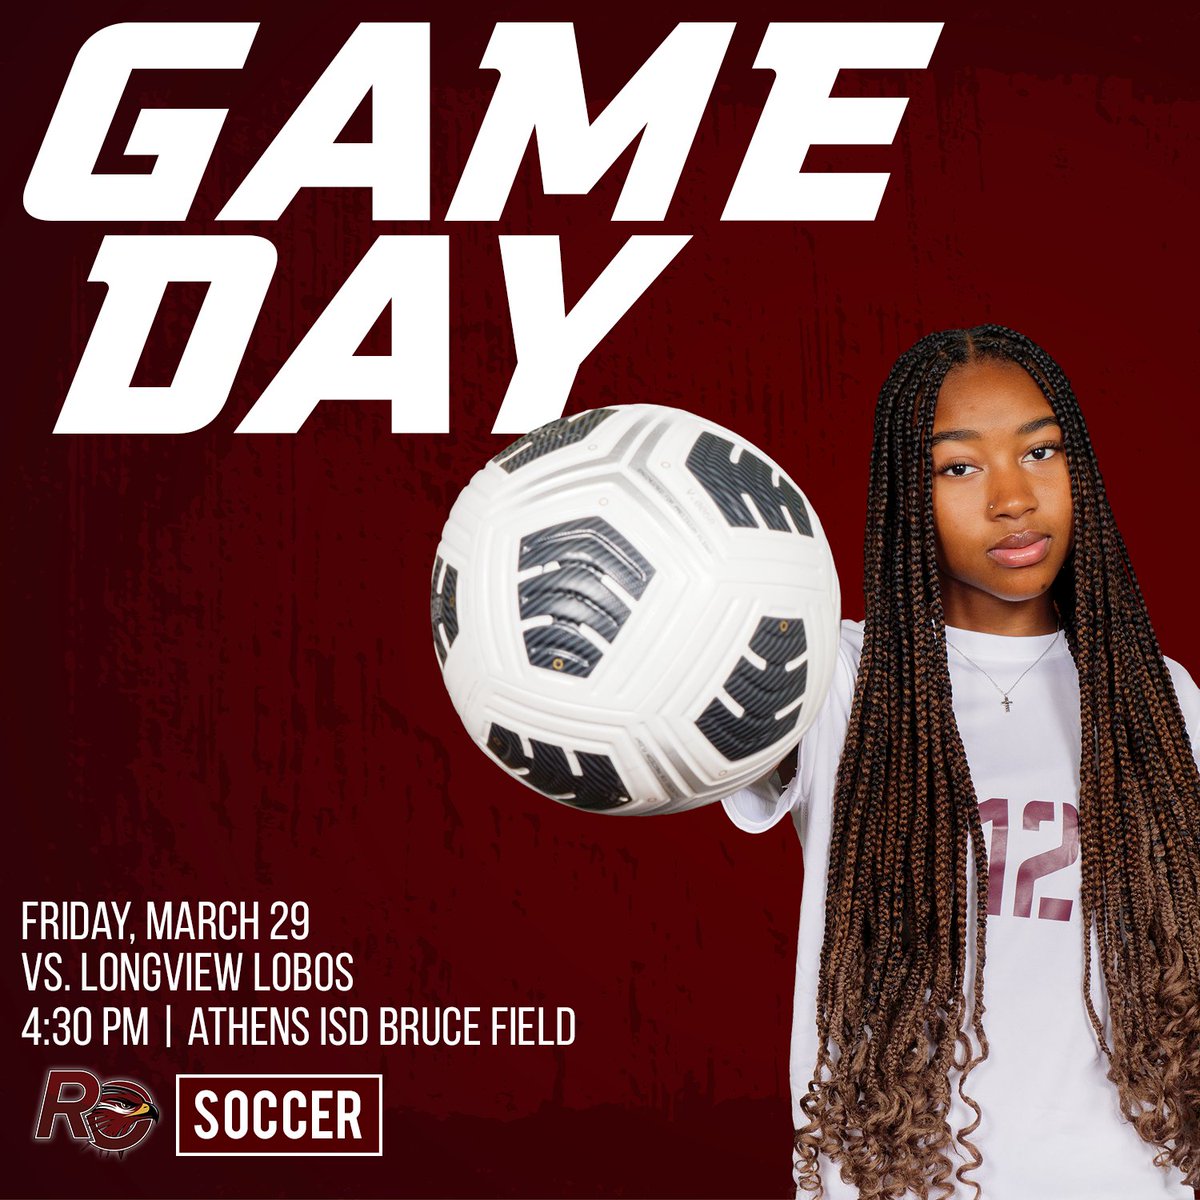 The Lady Hawks are still on the road to the championship! ⚽ 📅 Friday, March 29 📍 Athens ISD Bruce Field ⚽ Longview Lobos ⌚ 4:30 PM #hawknation #hawkpride